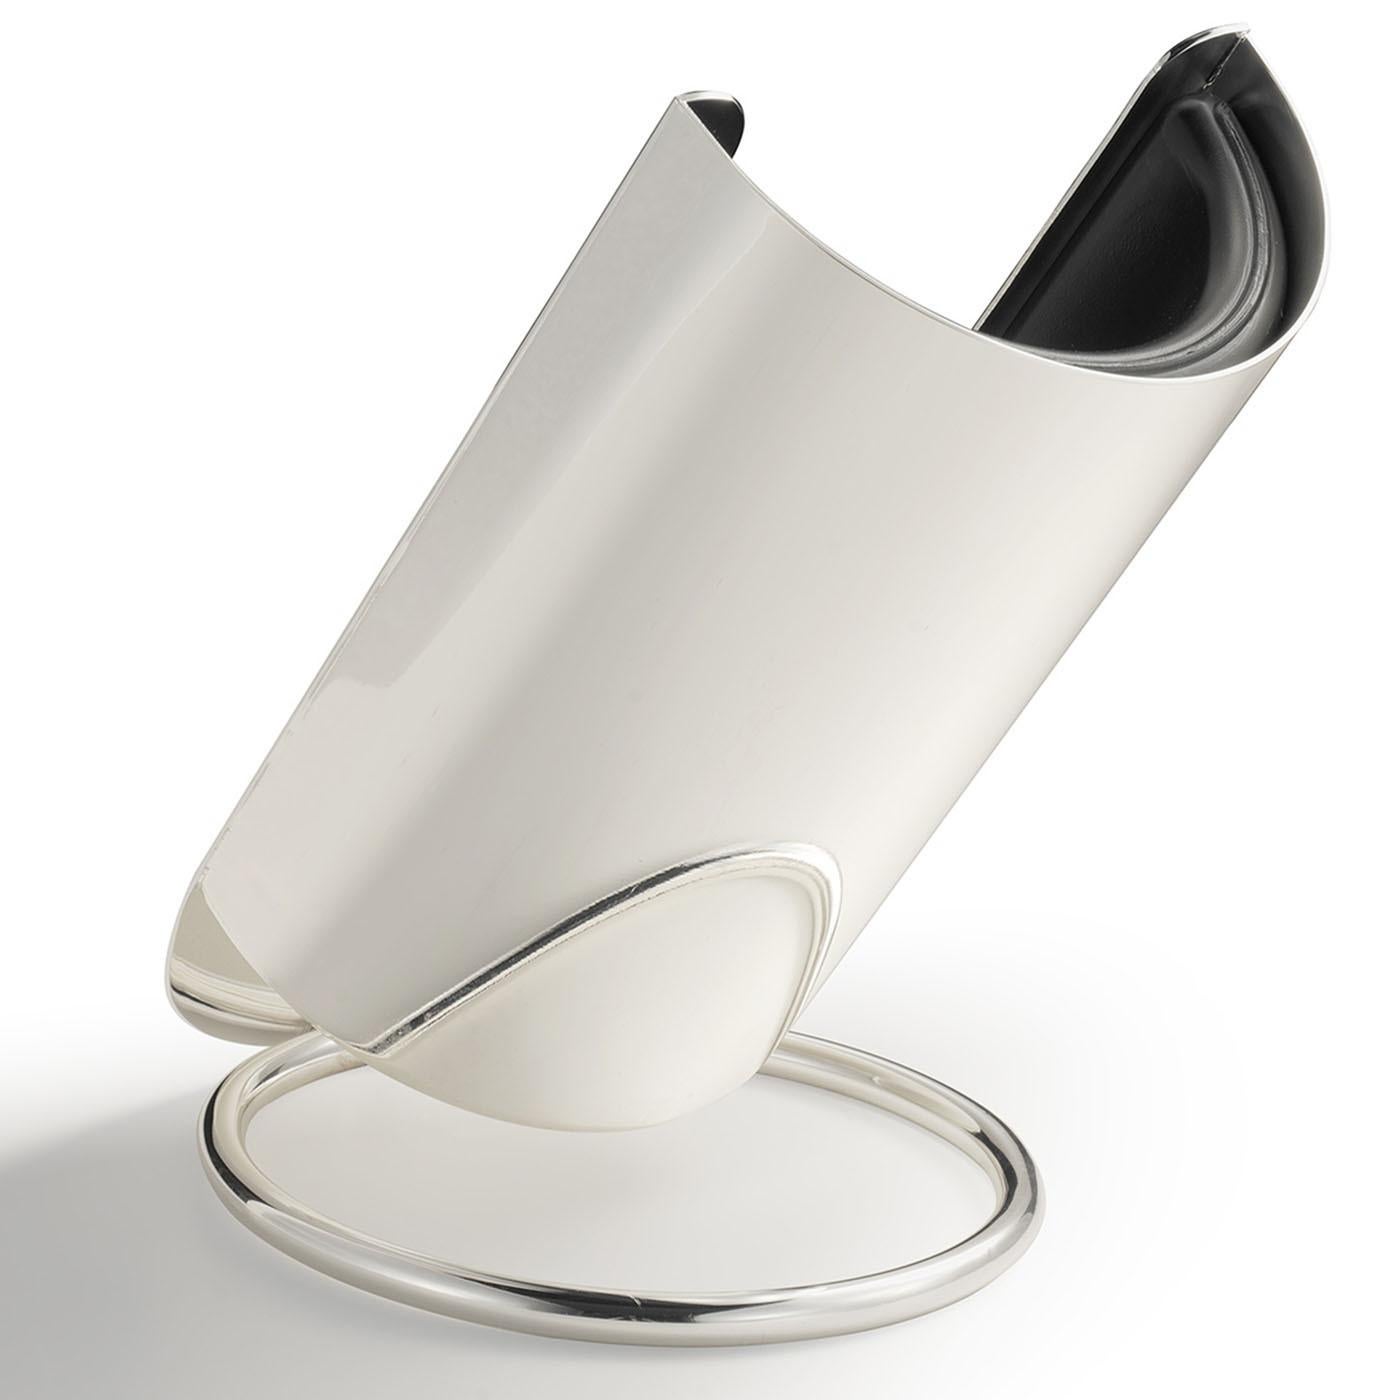 Superb for displaying bottles for special occasions, this exceptional bottle holder is the perfect addition to dining decors. The ringed base with a satin silver finish supports the half-moon shell, cooling your beverage while also exposing the